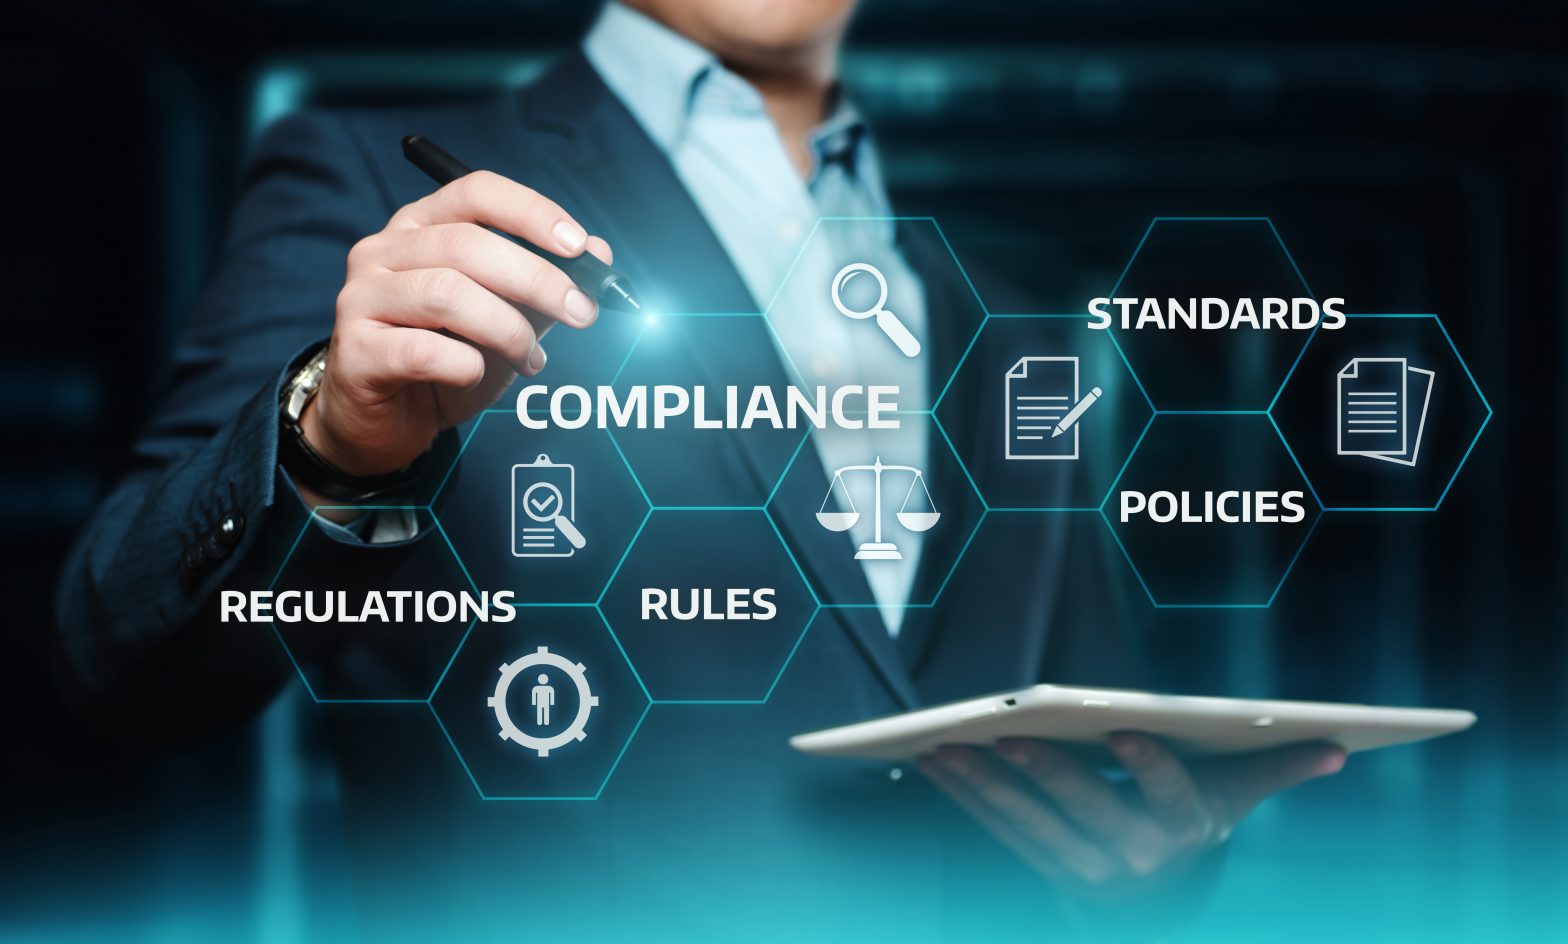 Compliance and Regulations